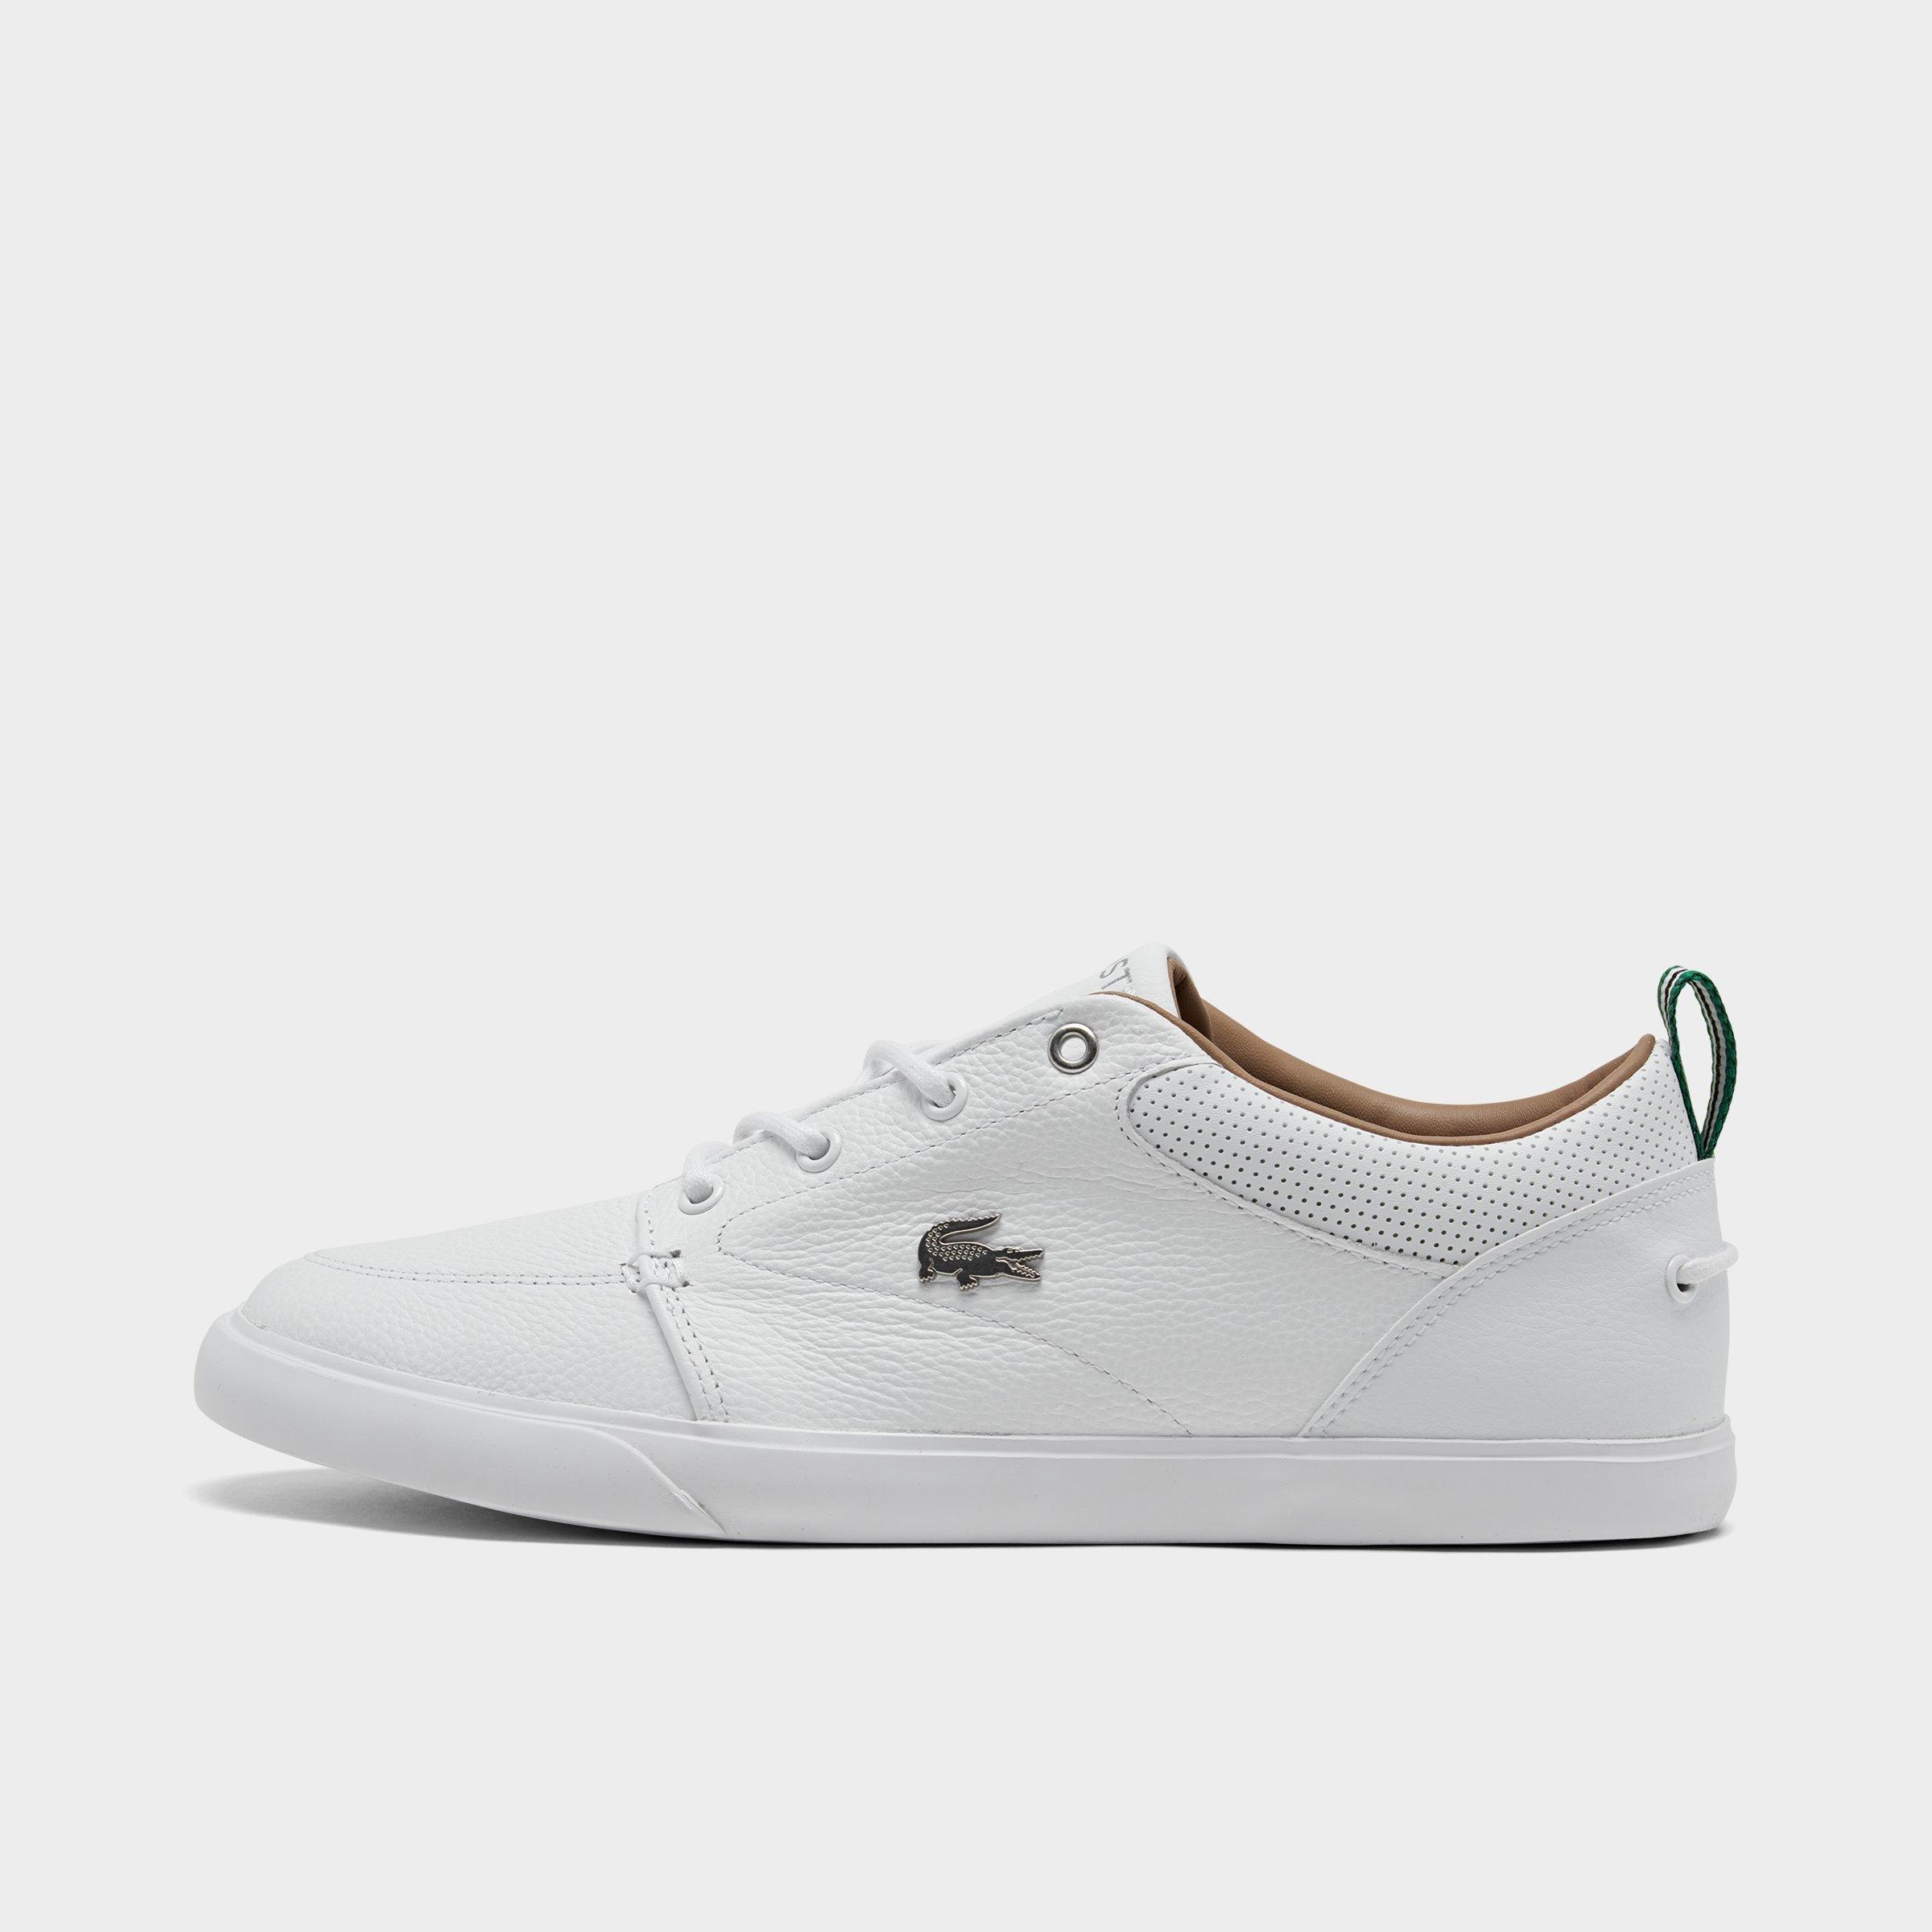 white lacoste shoes for men